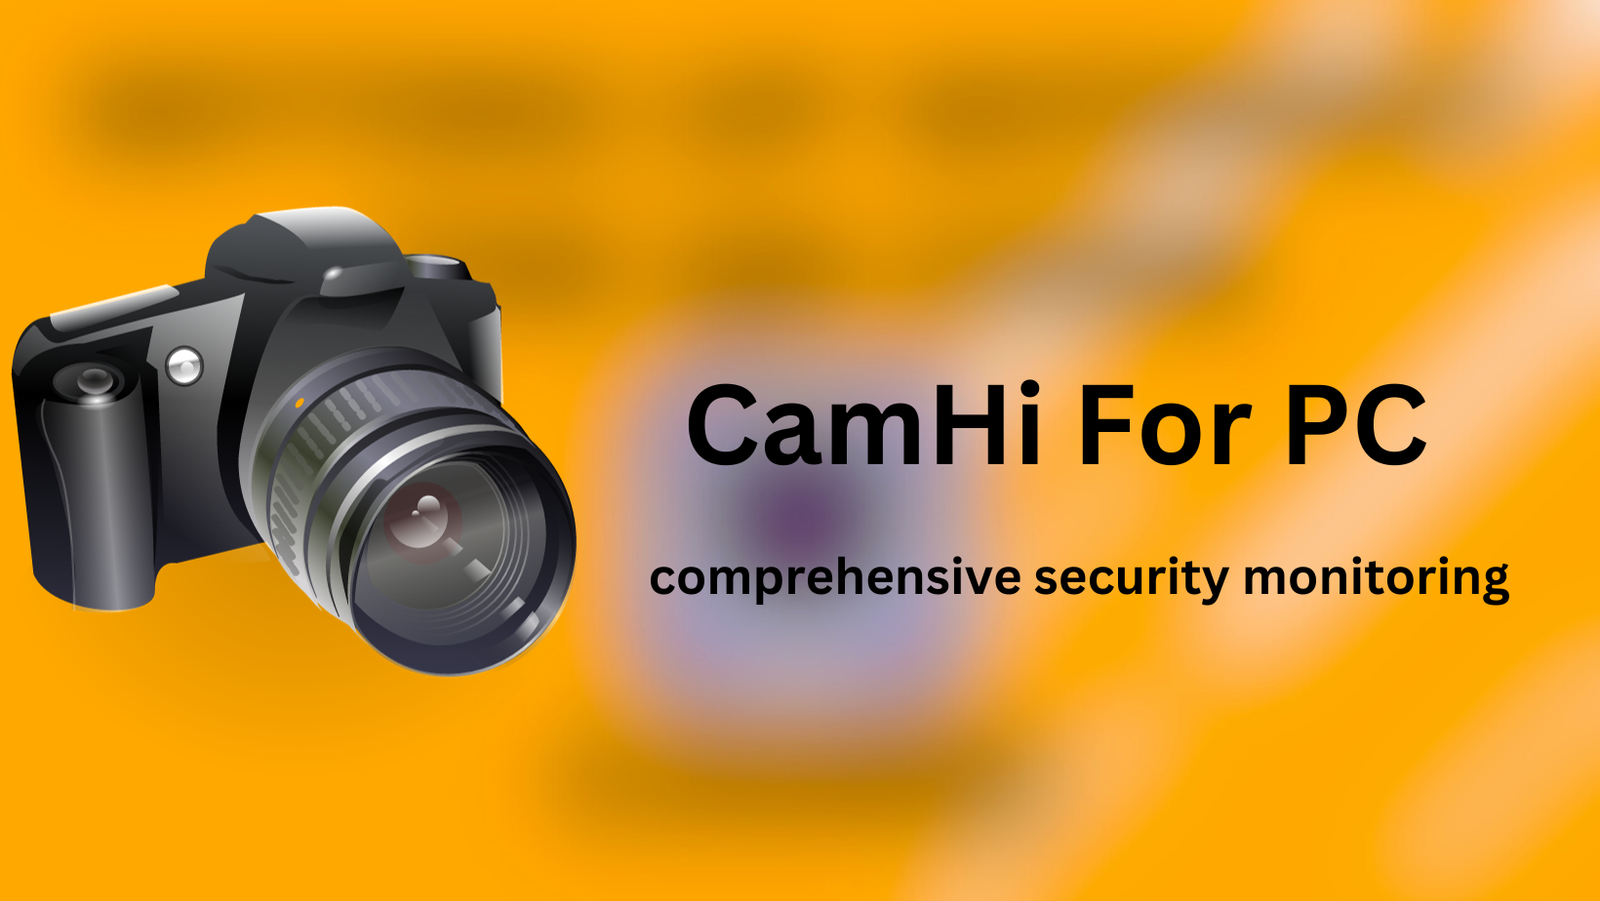 CamHi For PC